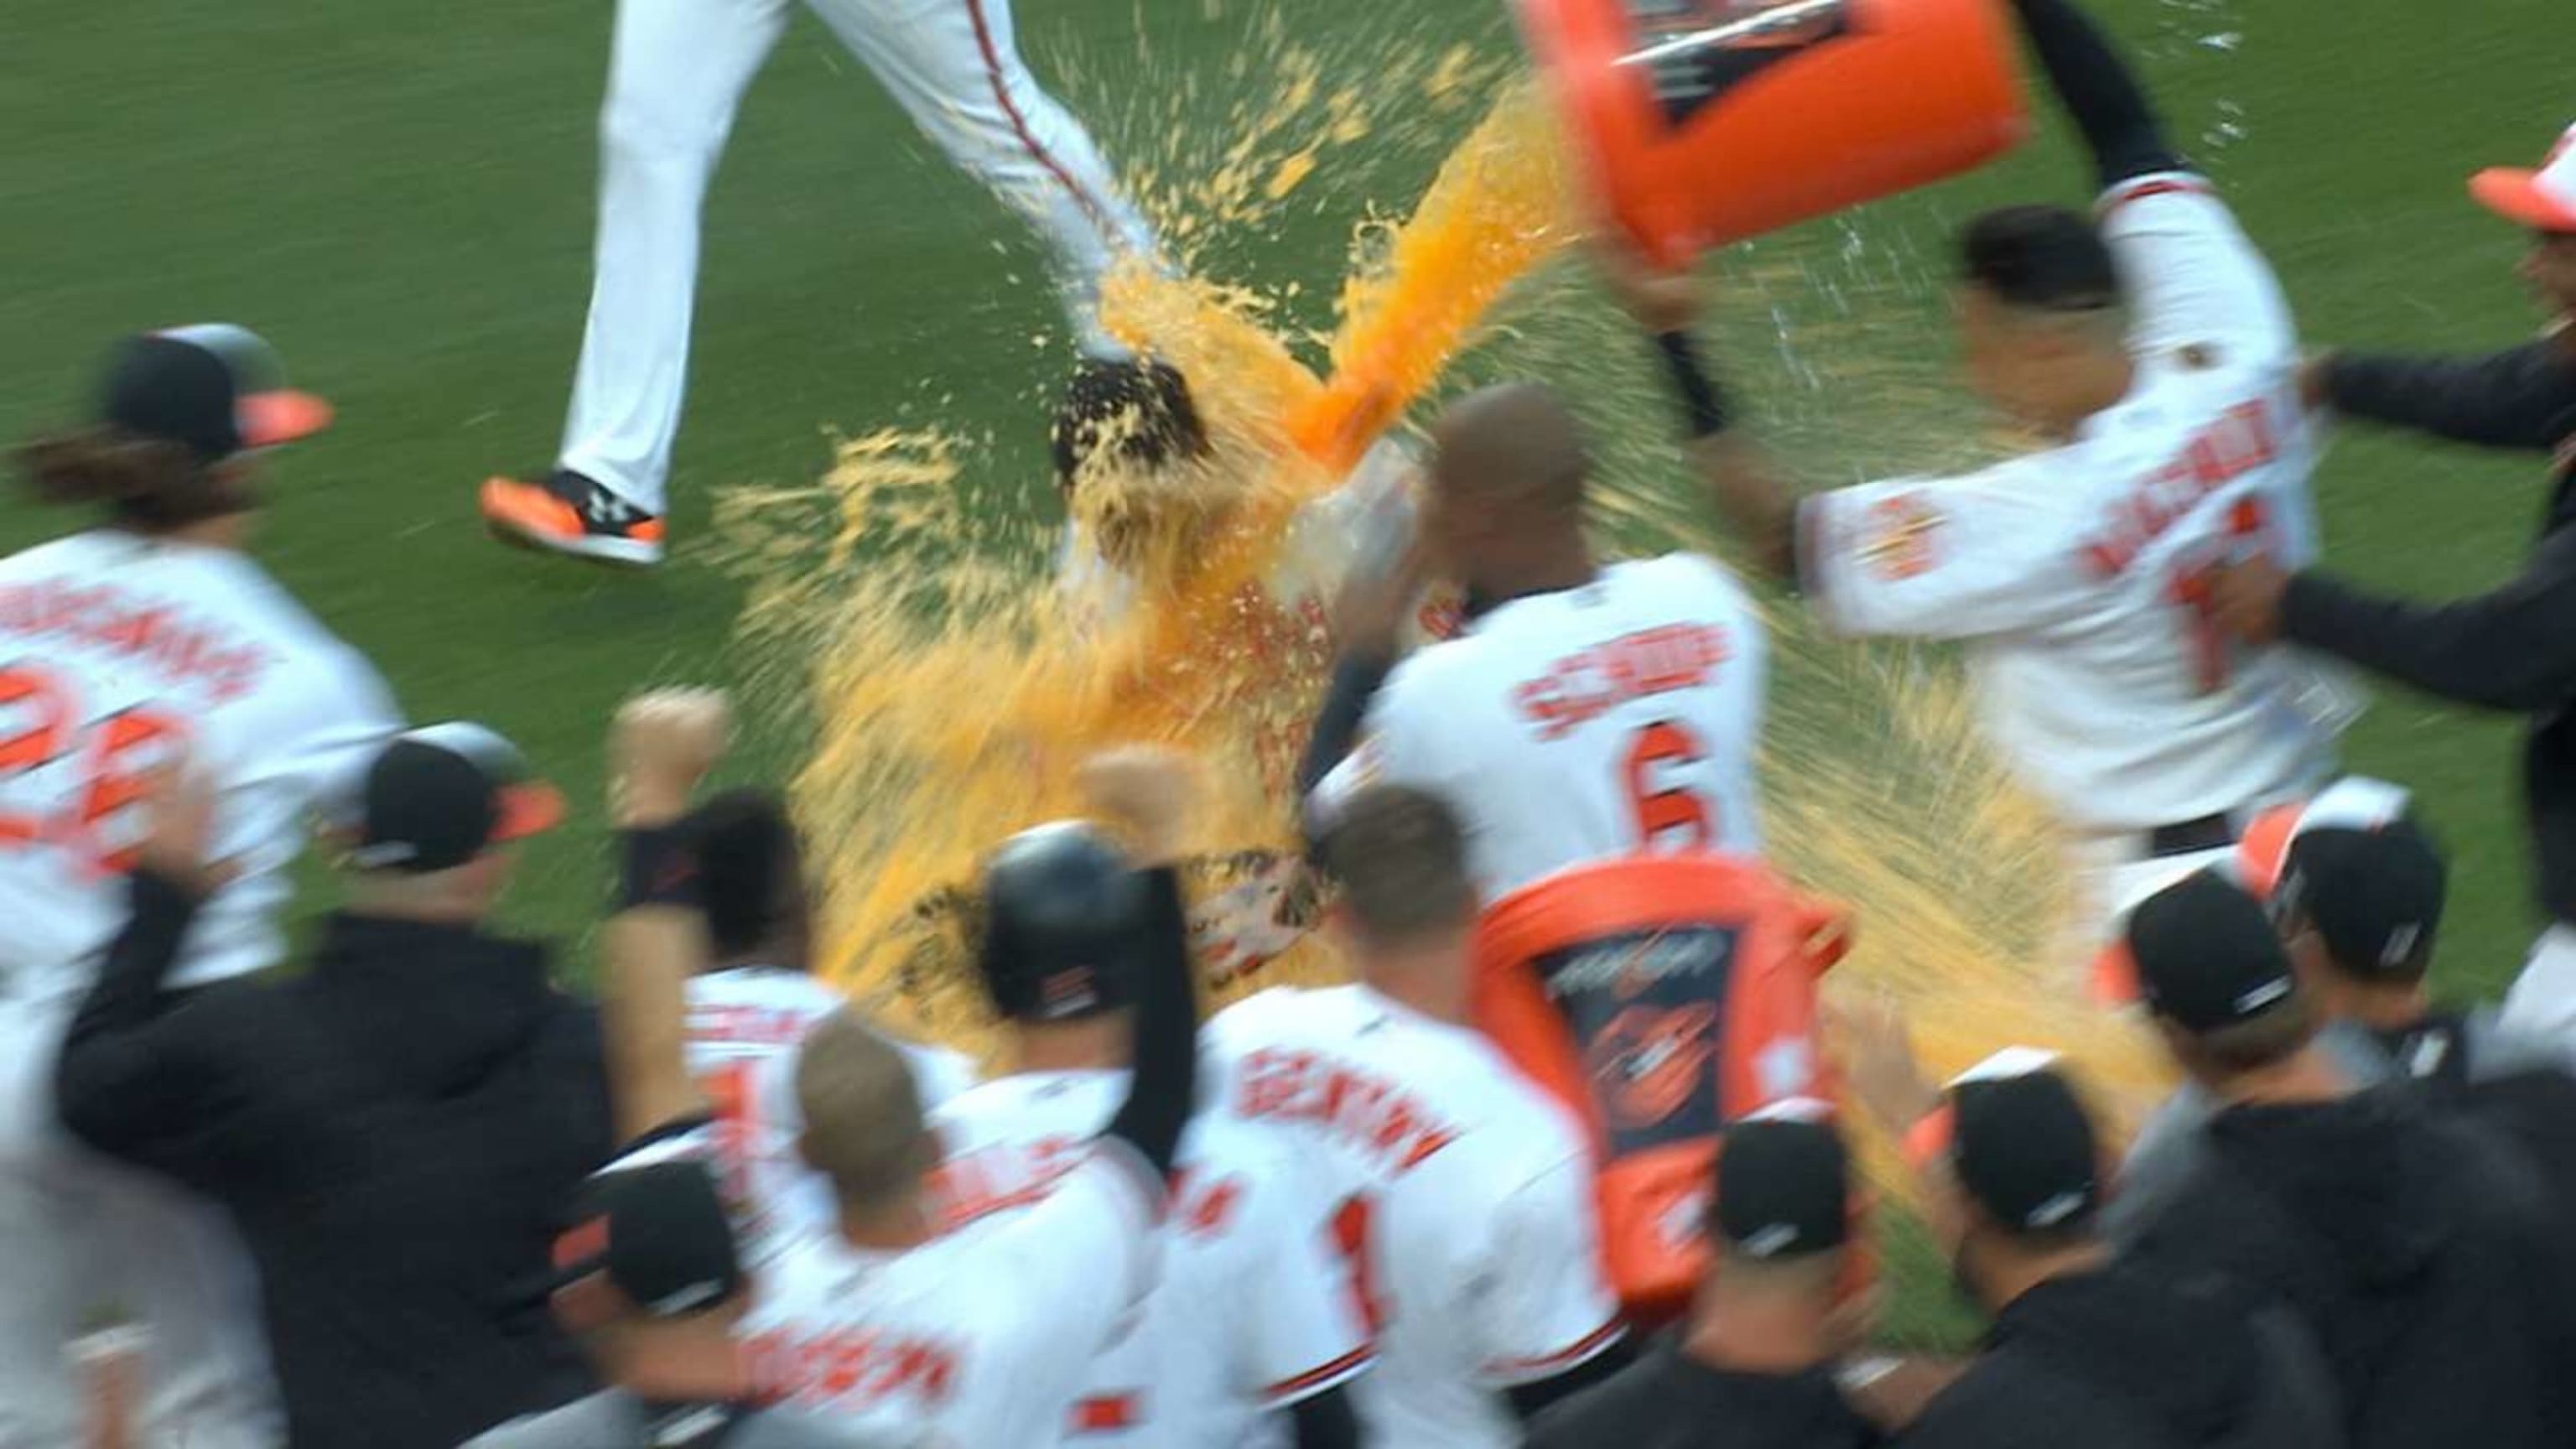 Wieters gives O's a walk-off